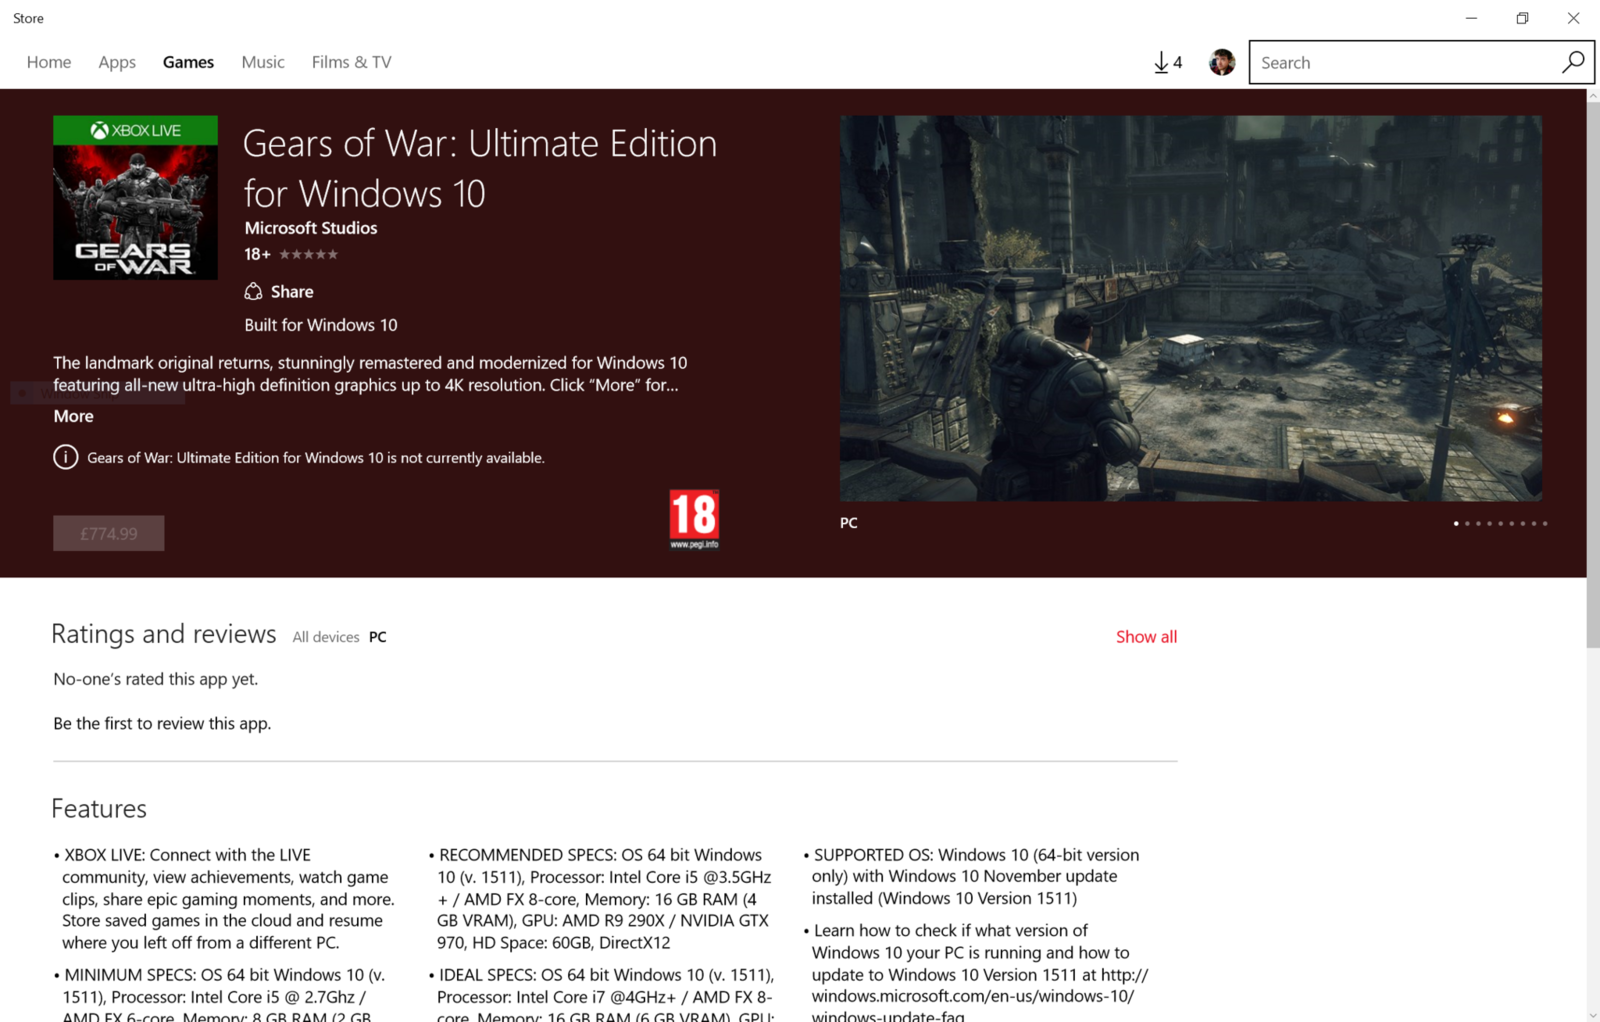 Gears of War Ultimate Edition - Windows Store